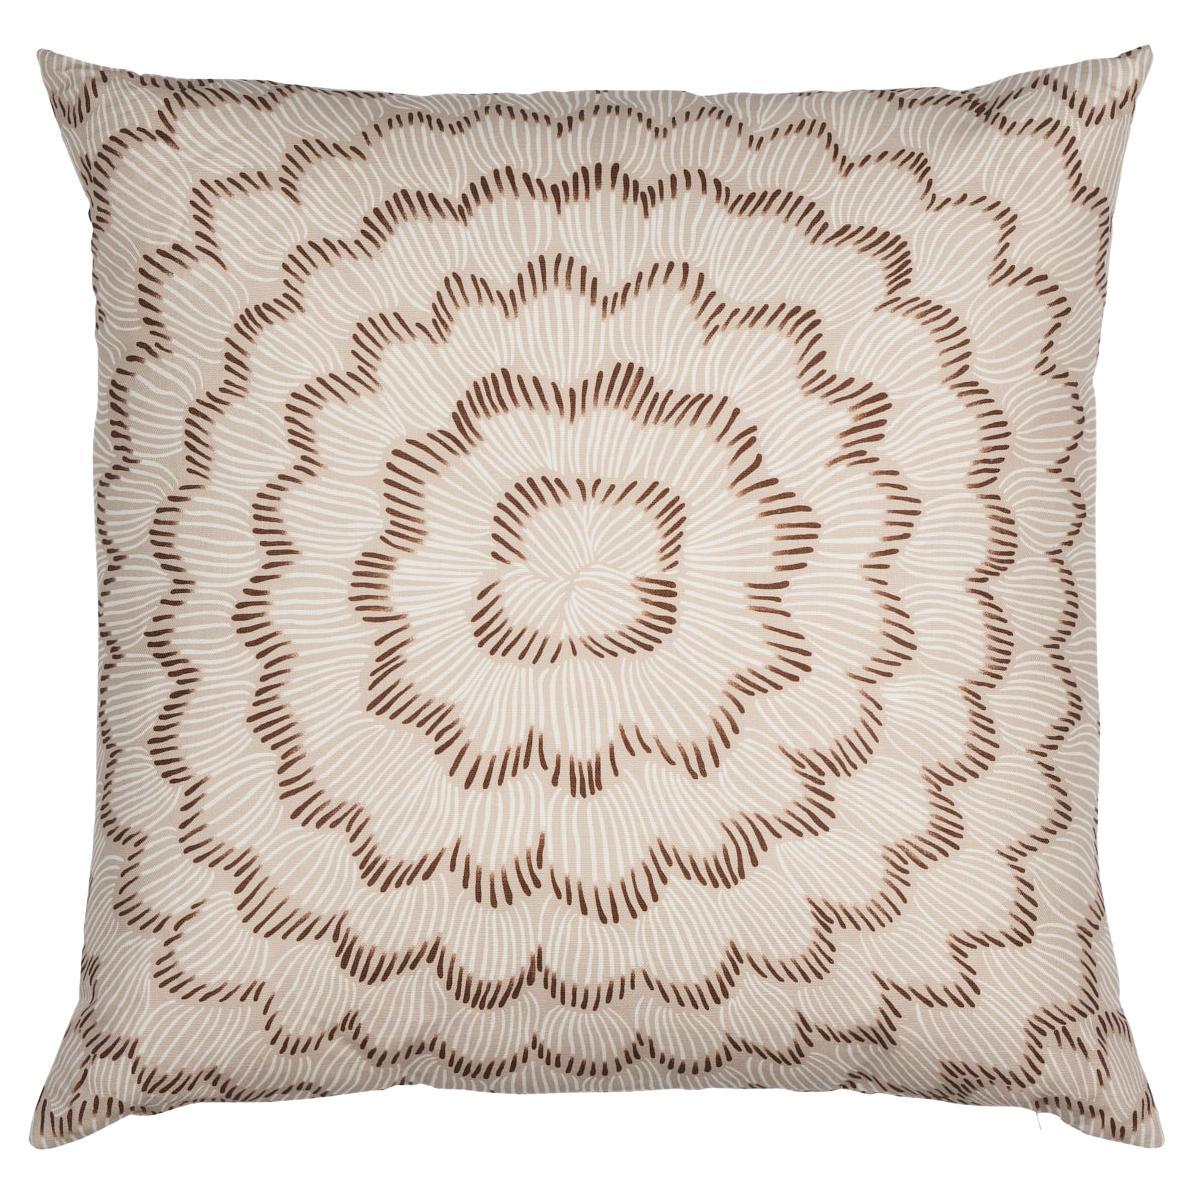 Shumacher Feather Bloom 24" Pillow in Dove For Sale